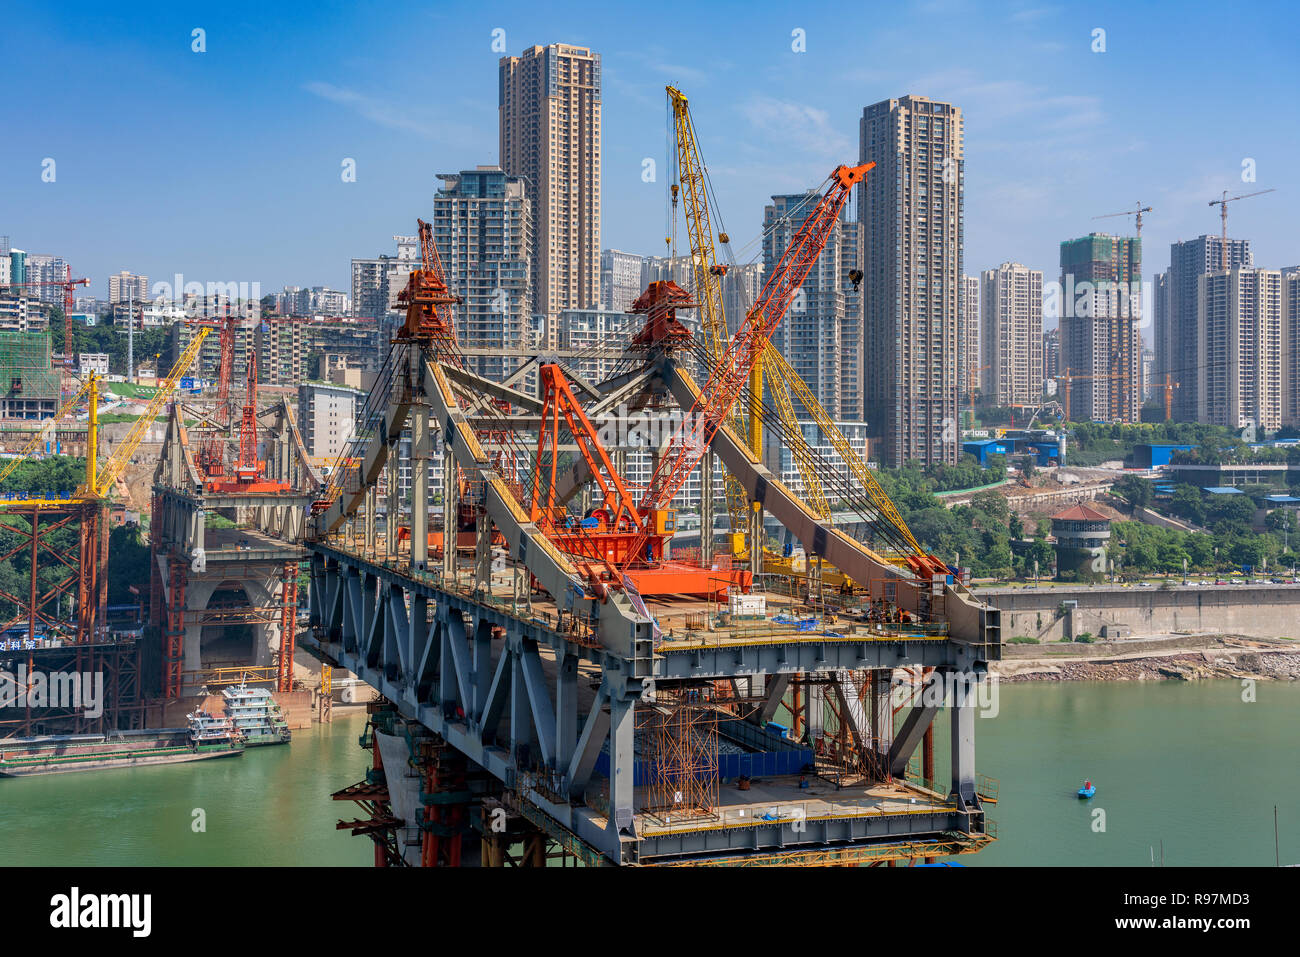 CHONGQING, CHINA - SEPTEMBER 19: View of a bridge under constuction along the Yangtze river in Chongqing on September 19, 2018 in Chognqing Stock Photo